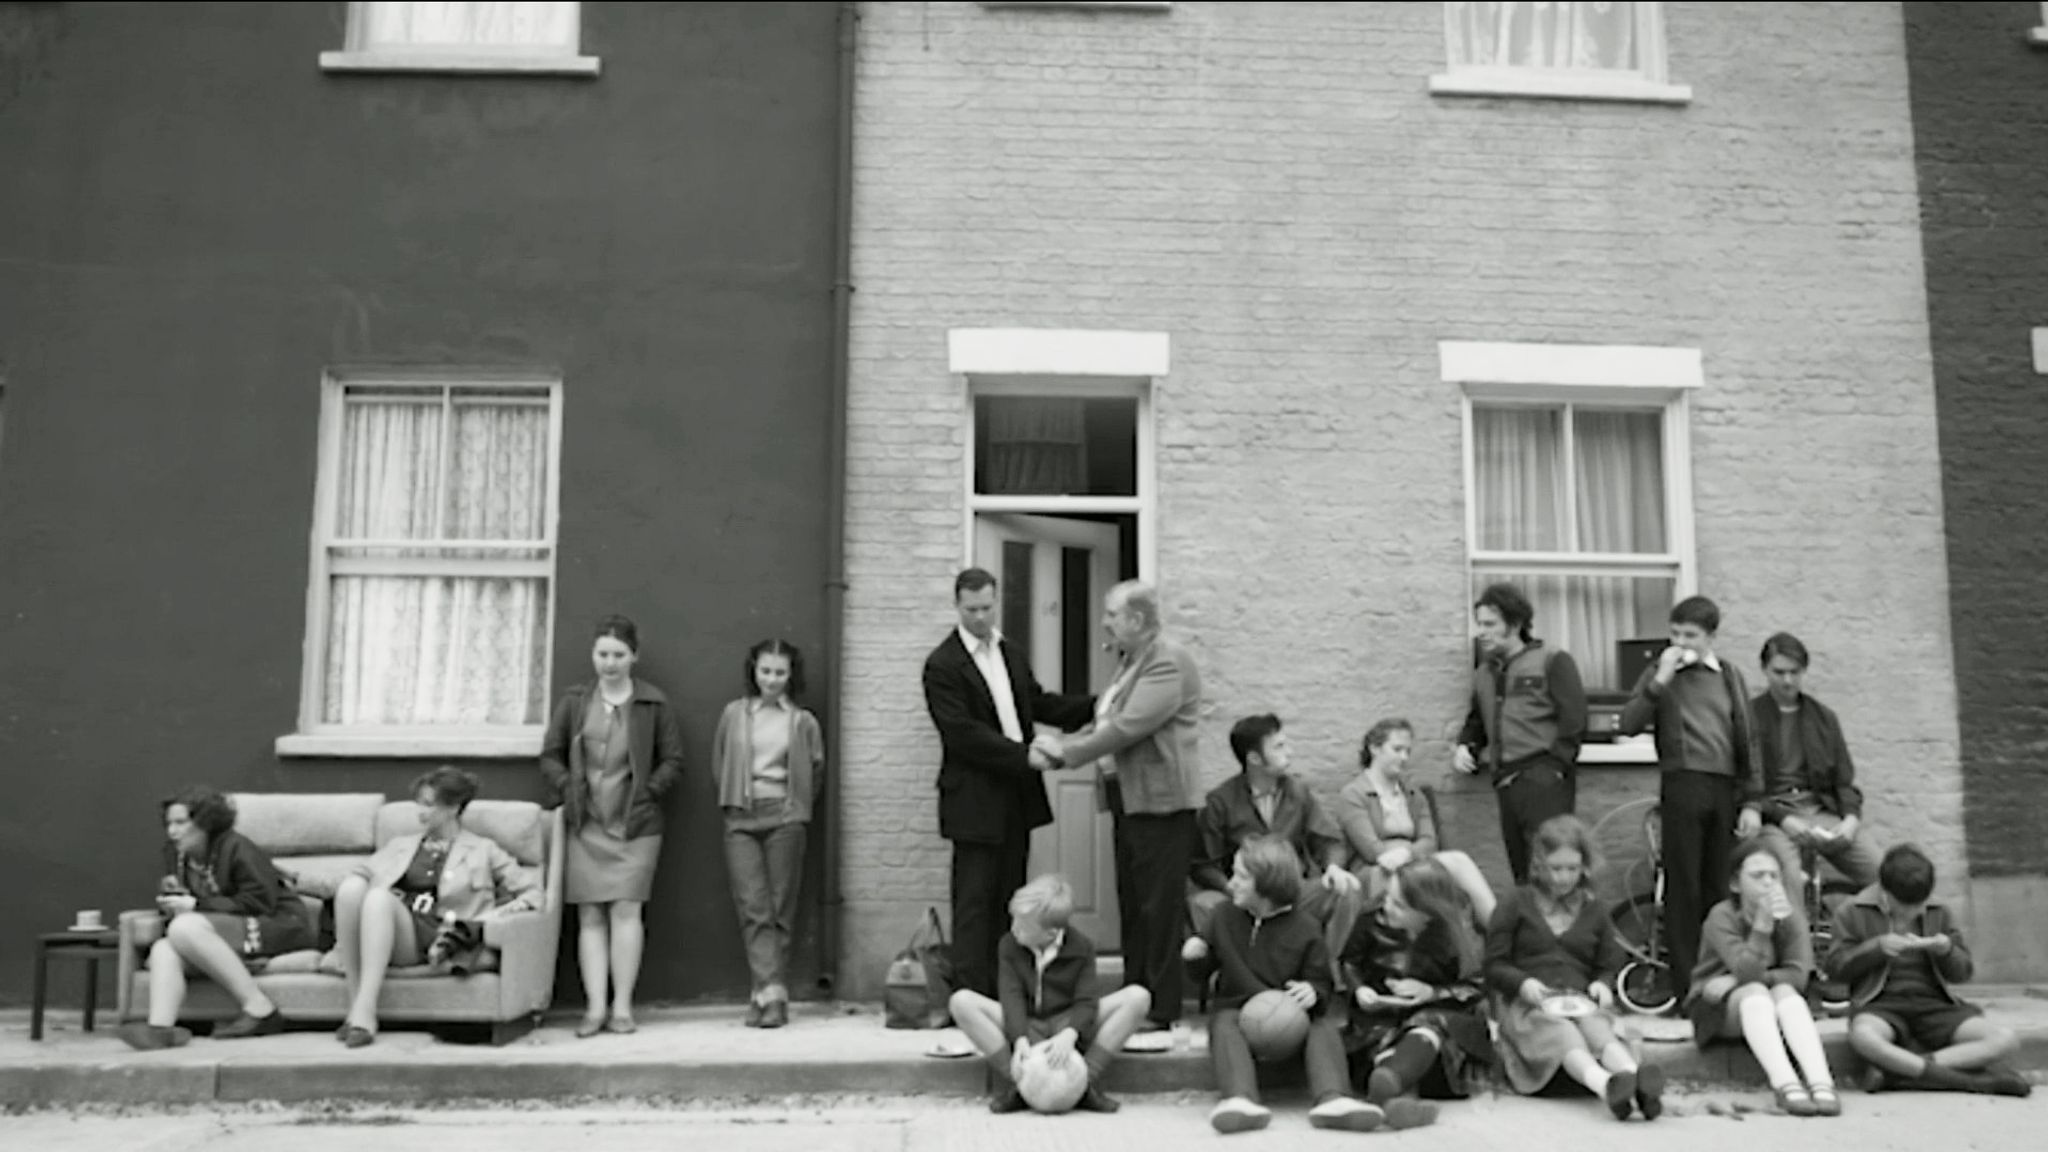 &#39;Belfast&#39; portrays working class life in the city in the late 1960s